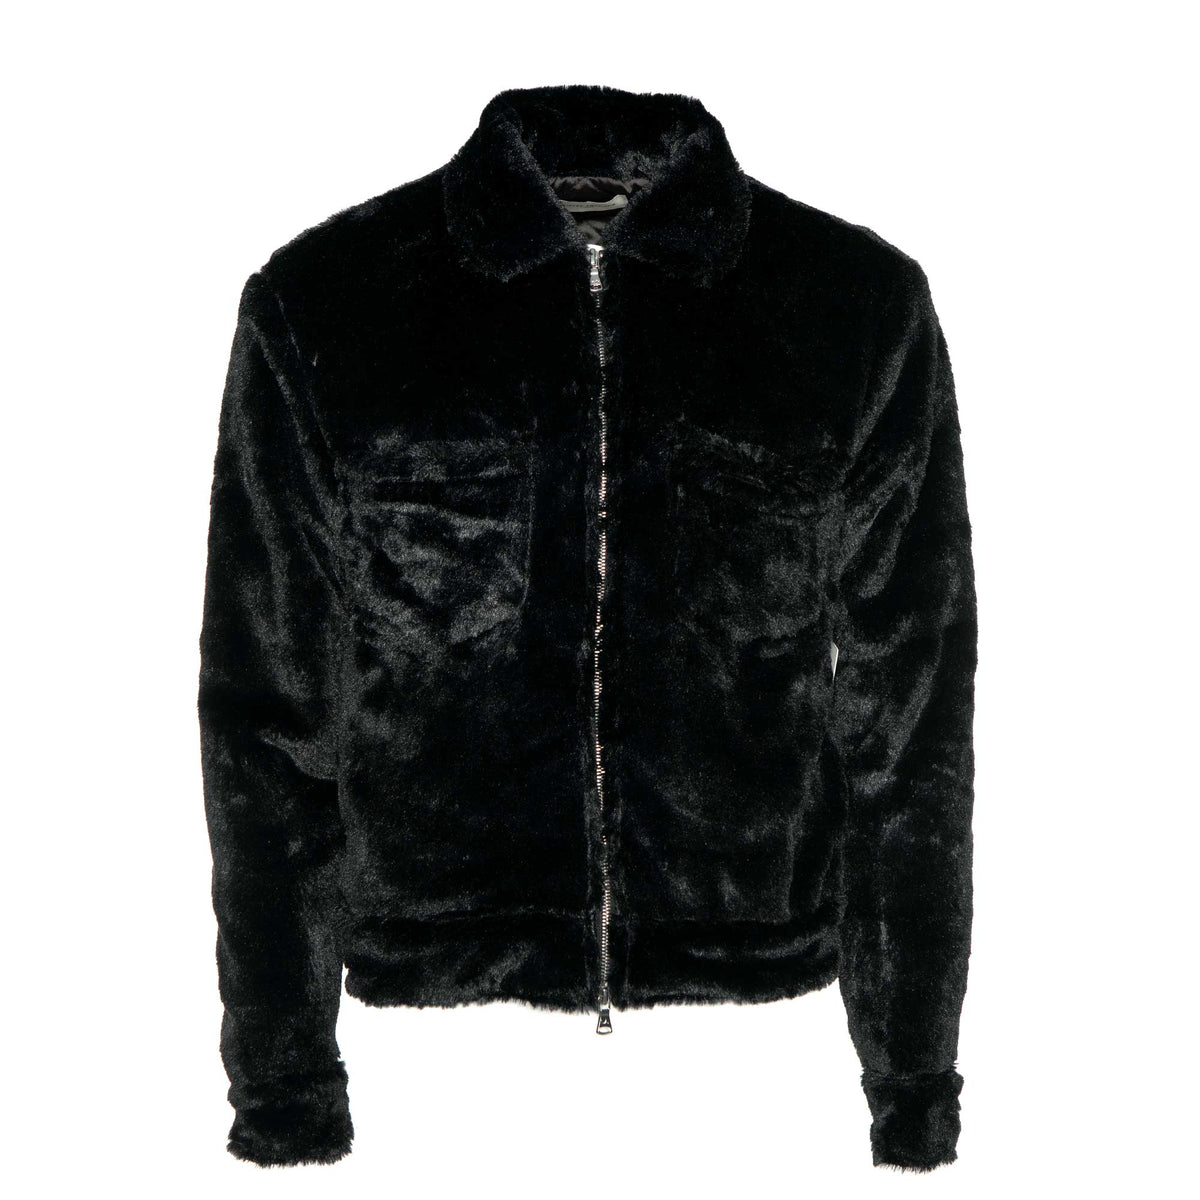 Lifted Anchors Men's Fowe Jacket